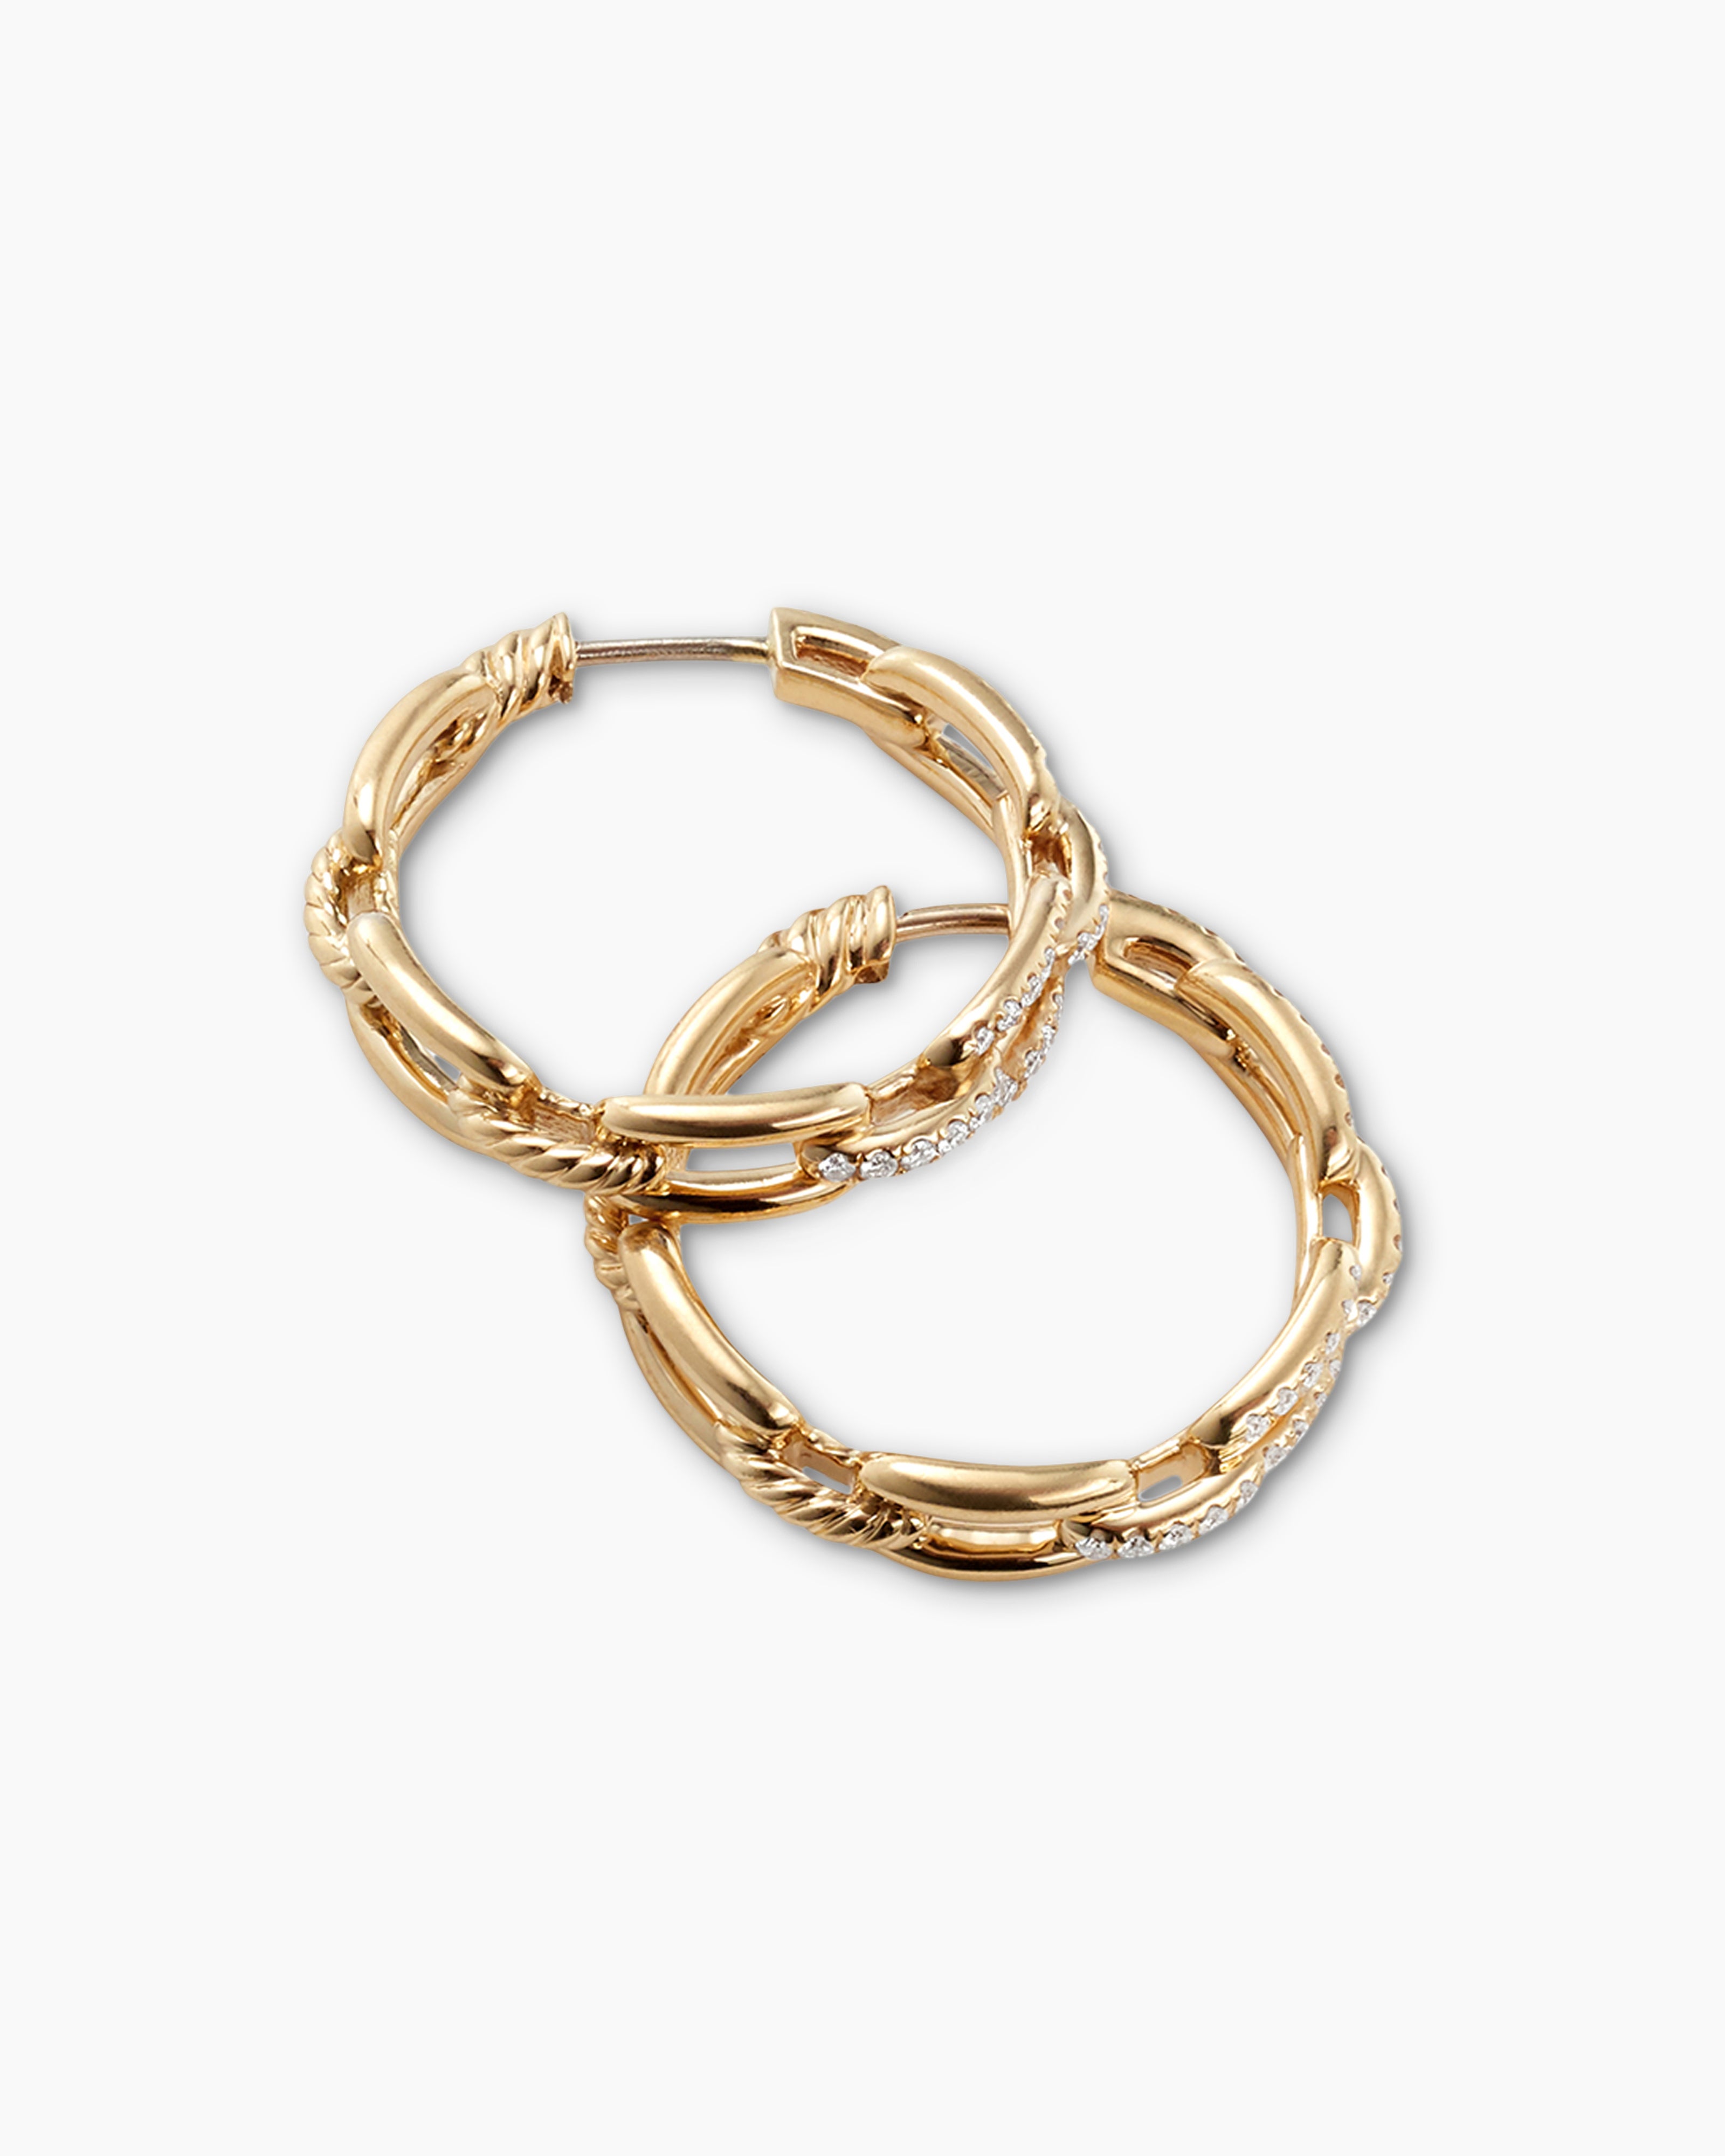 Stax Chain Link Hoop Earrings in 18K Yellow Gold with Diamonds